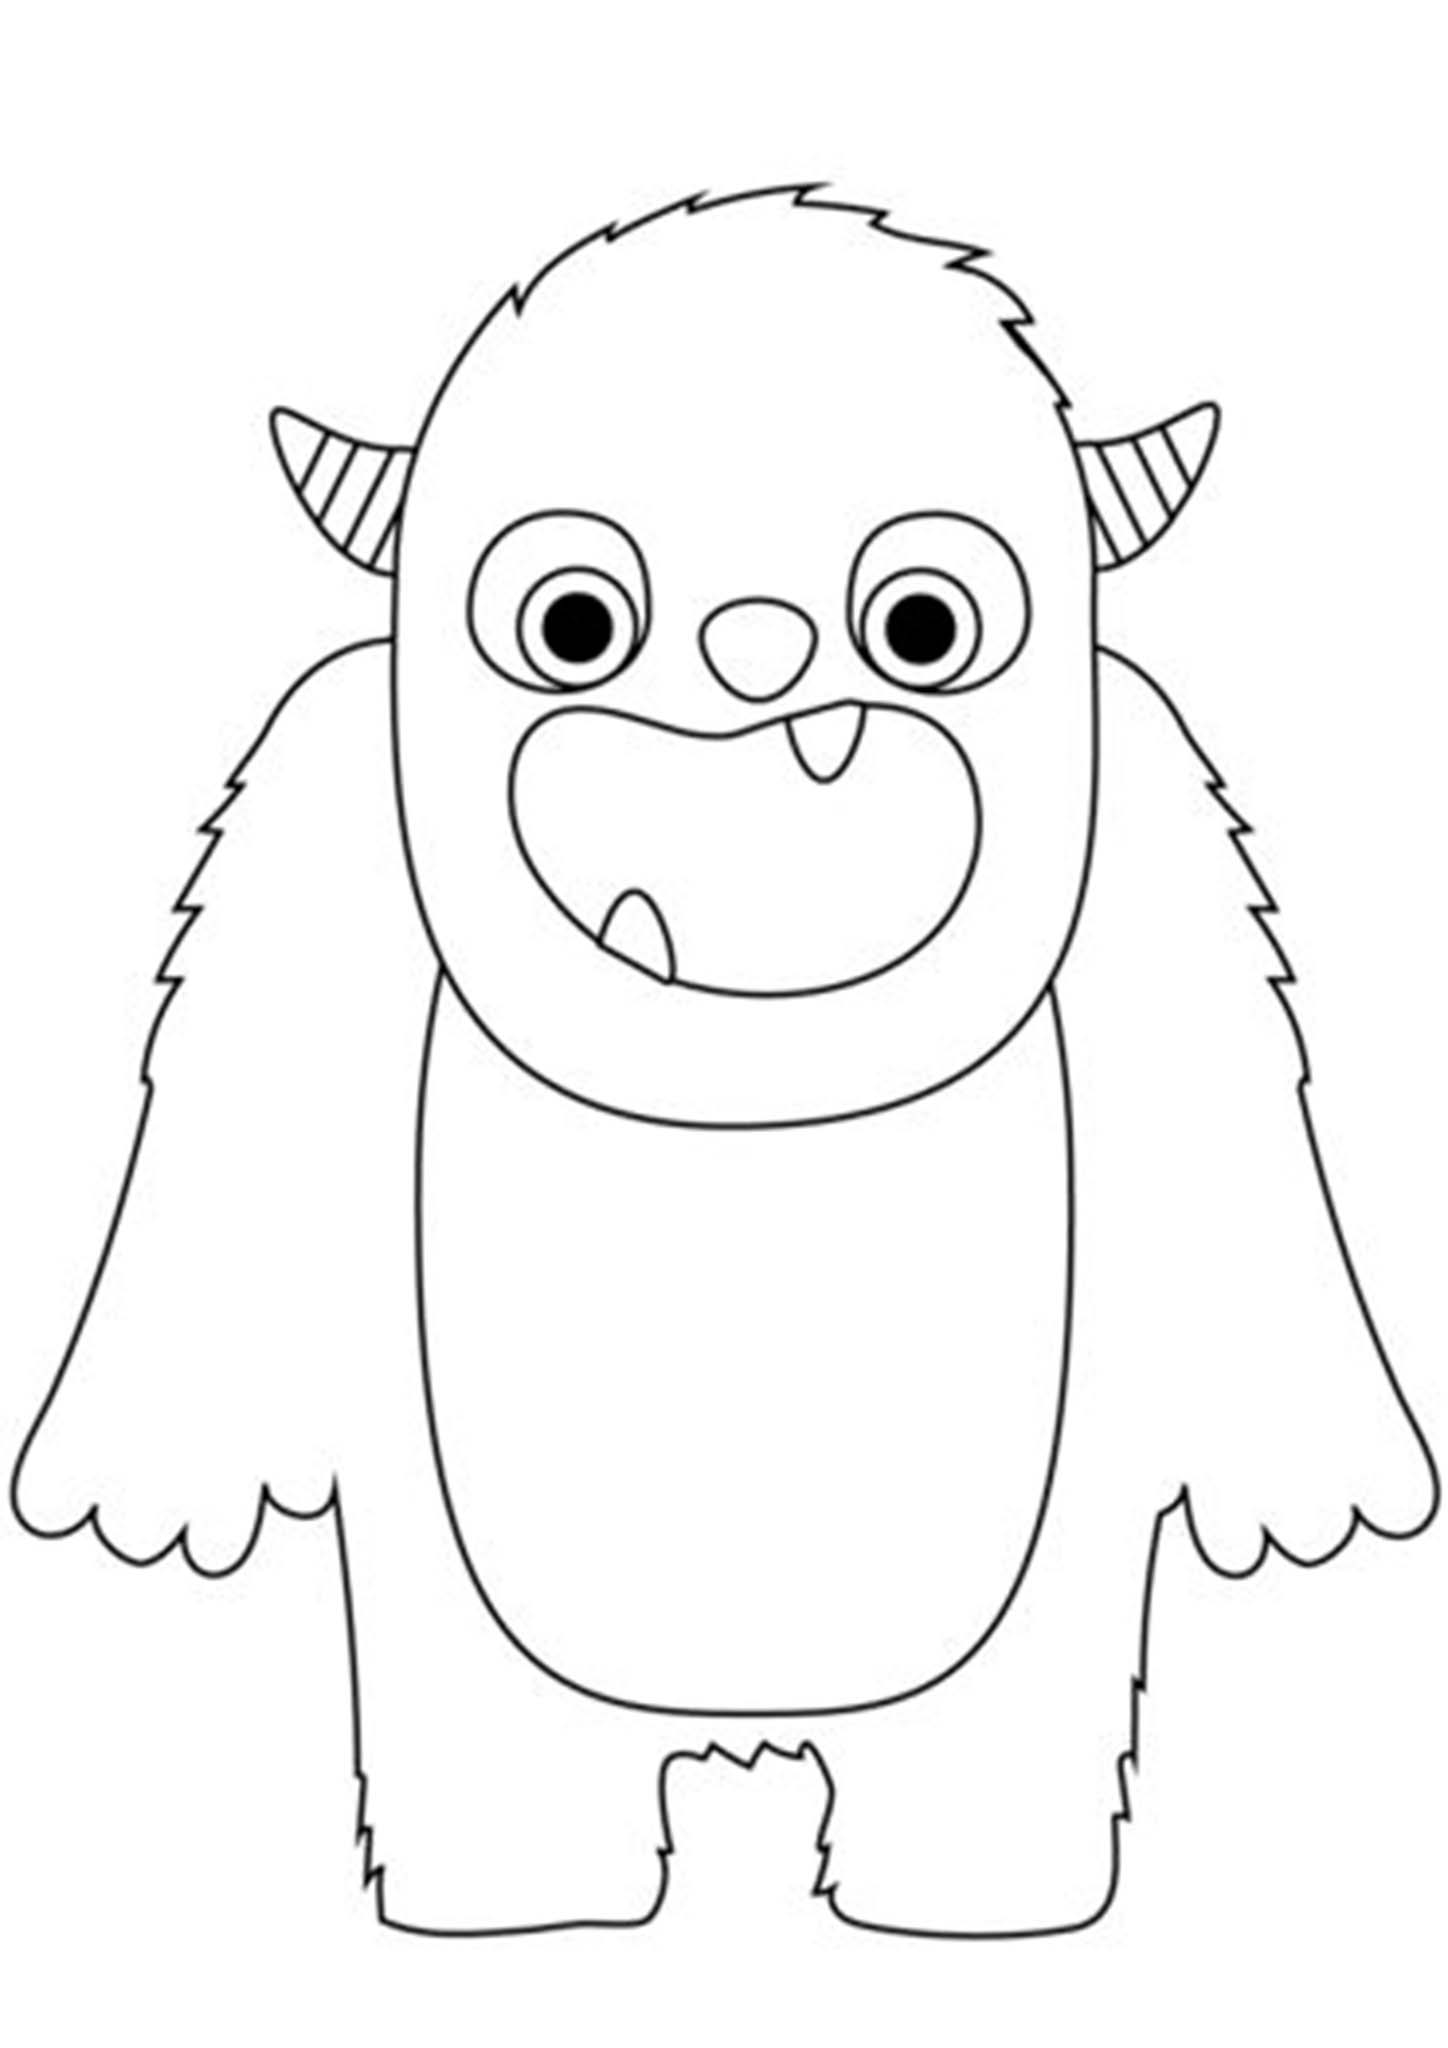 Free & Easy To Print Monster Coloring Pages   Tulamama